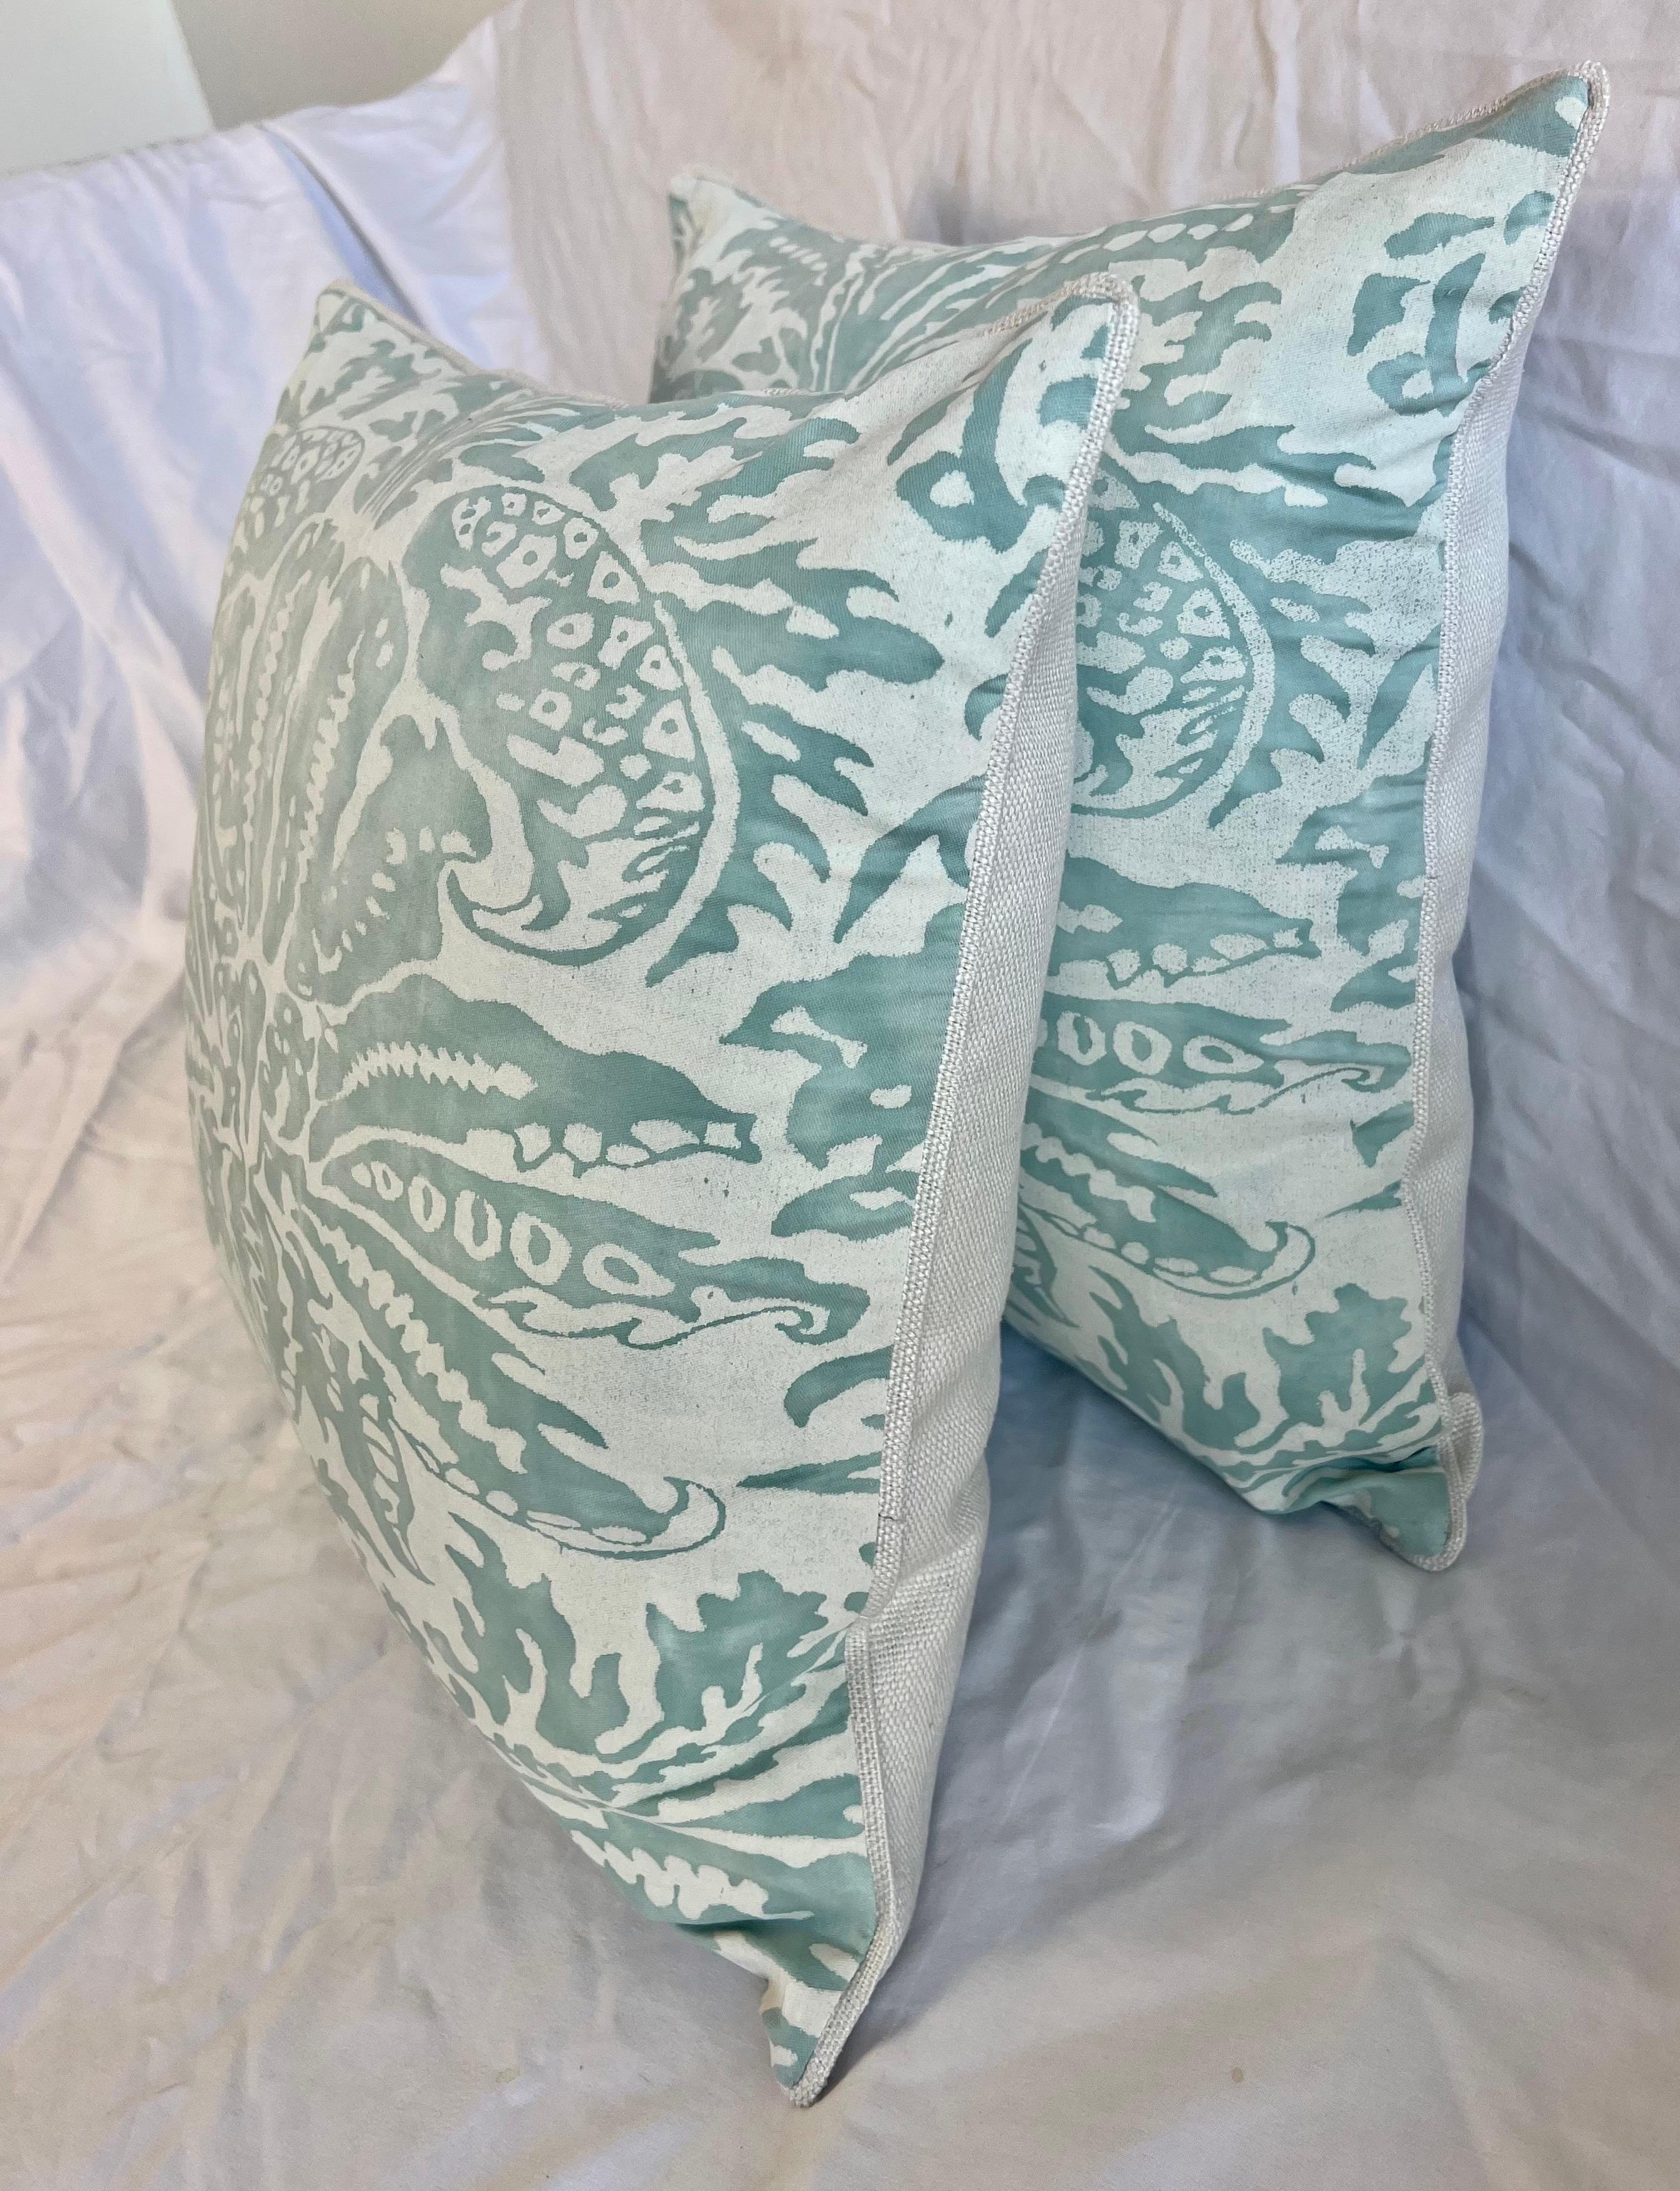 Pair of Aqua & White Colored Fortuny Pillows In Excellent Condition For Sale In Los Angeles, CA